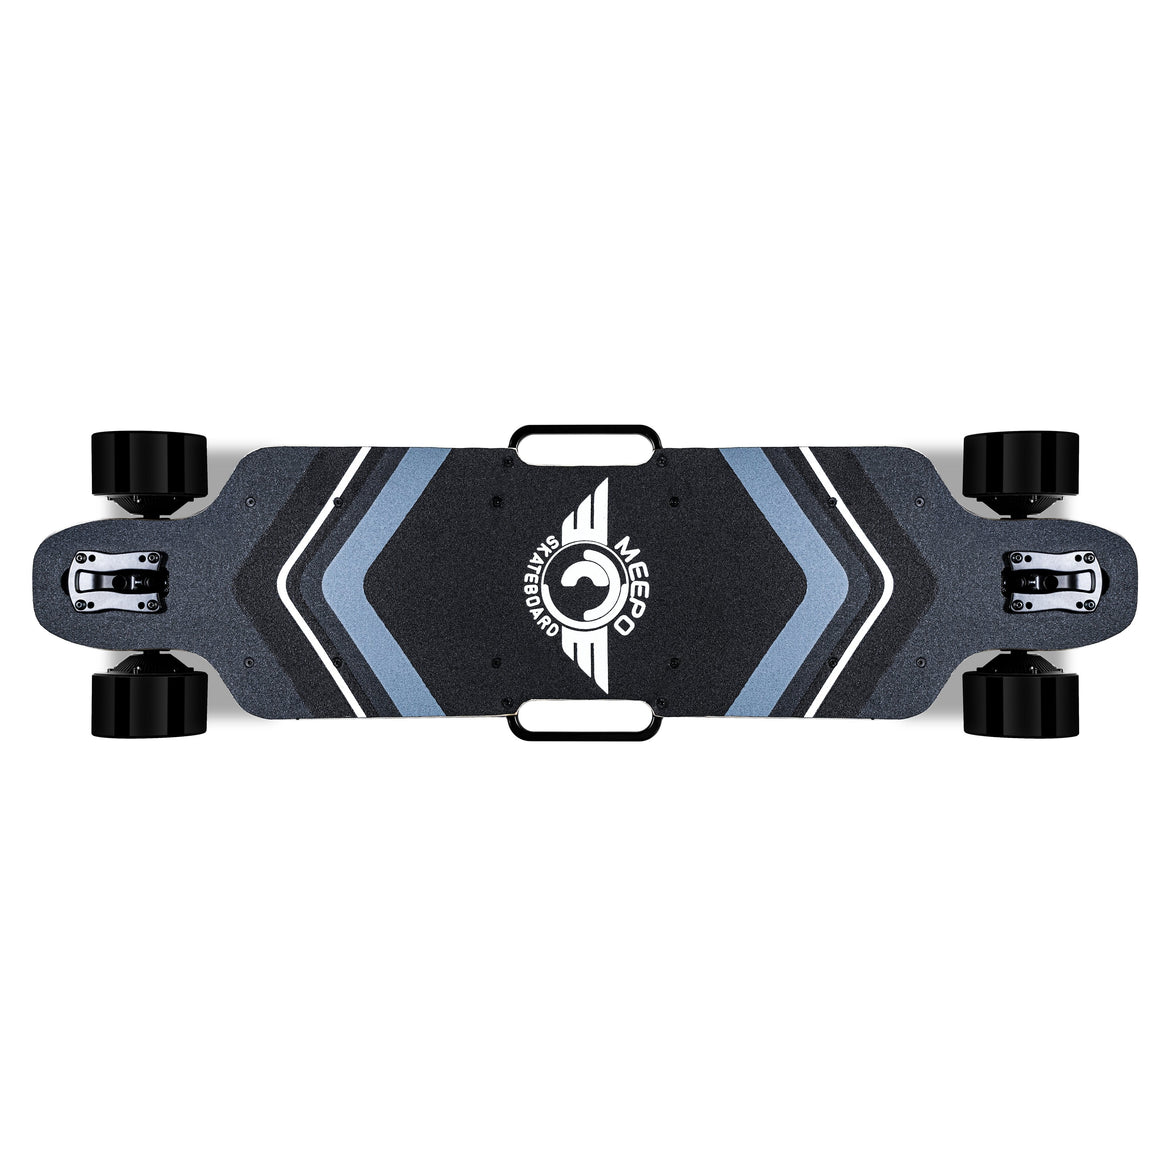 AWD Electric Skateboard - Top View with Grip Tape, Handles, Top of Wheels View